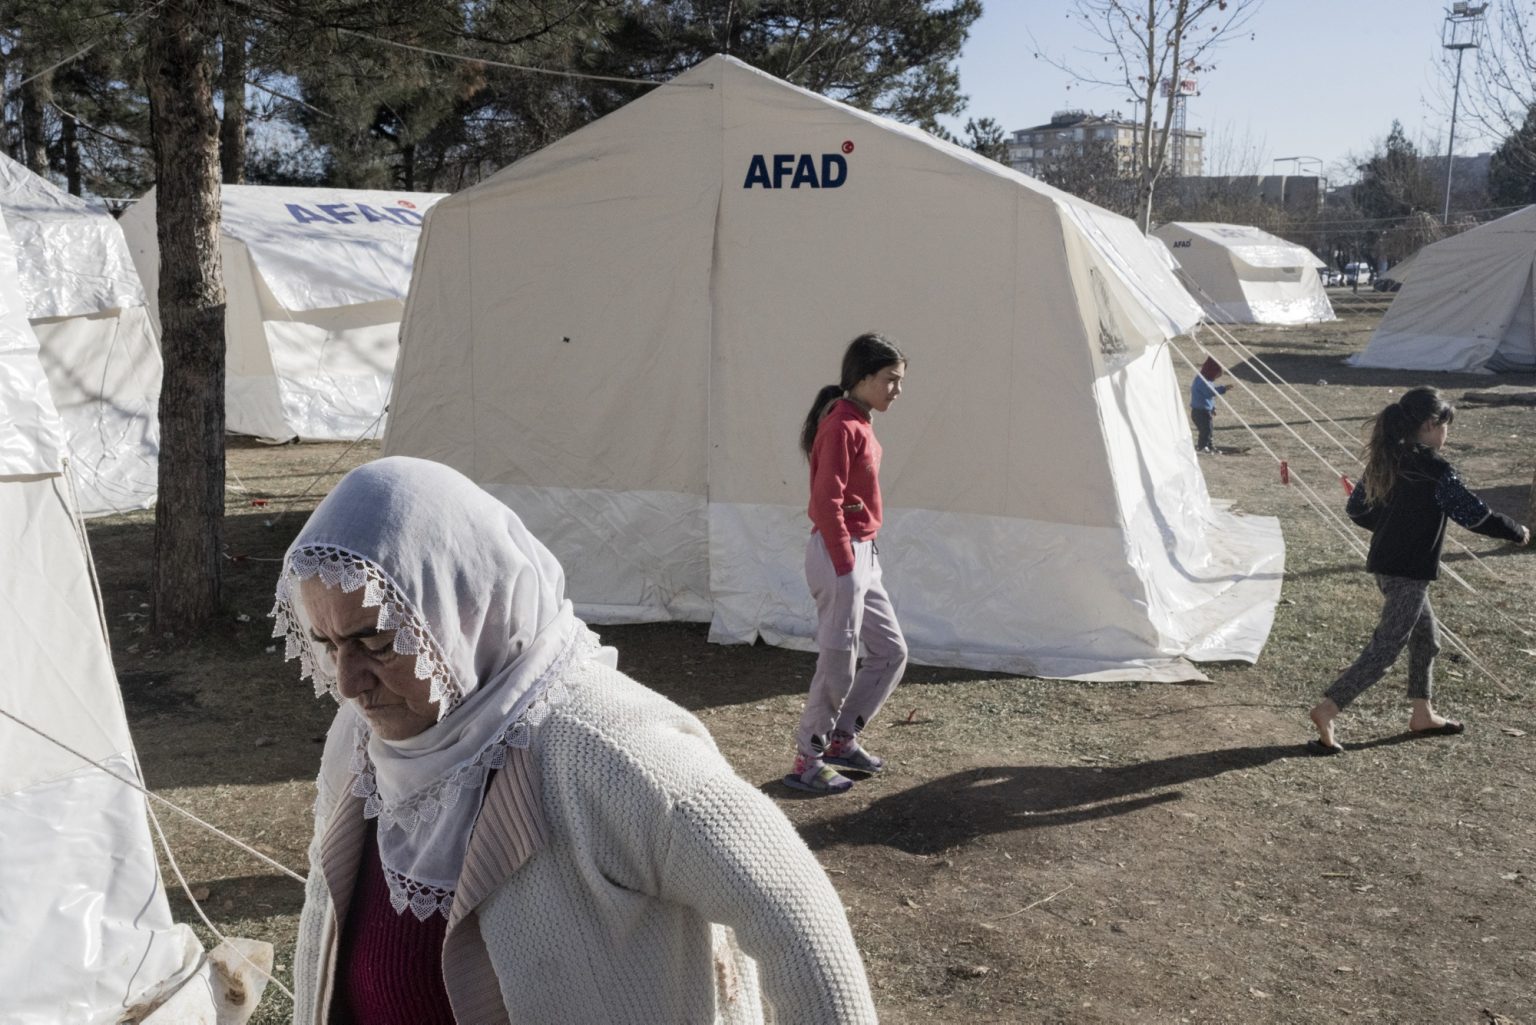 Diyarbakir, Turkey, February 2023 - The aftermath of the earthquake that hit southern Turkey and northern Syria.  A woman and girls walk in a tent camp set up in the city of Diyarbakir.><
Diyarbakir, Turchia, febbraio 2023  Le conseguenze del terremoto che ha colpito la Turchia del Sud e la Siria del nord.